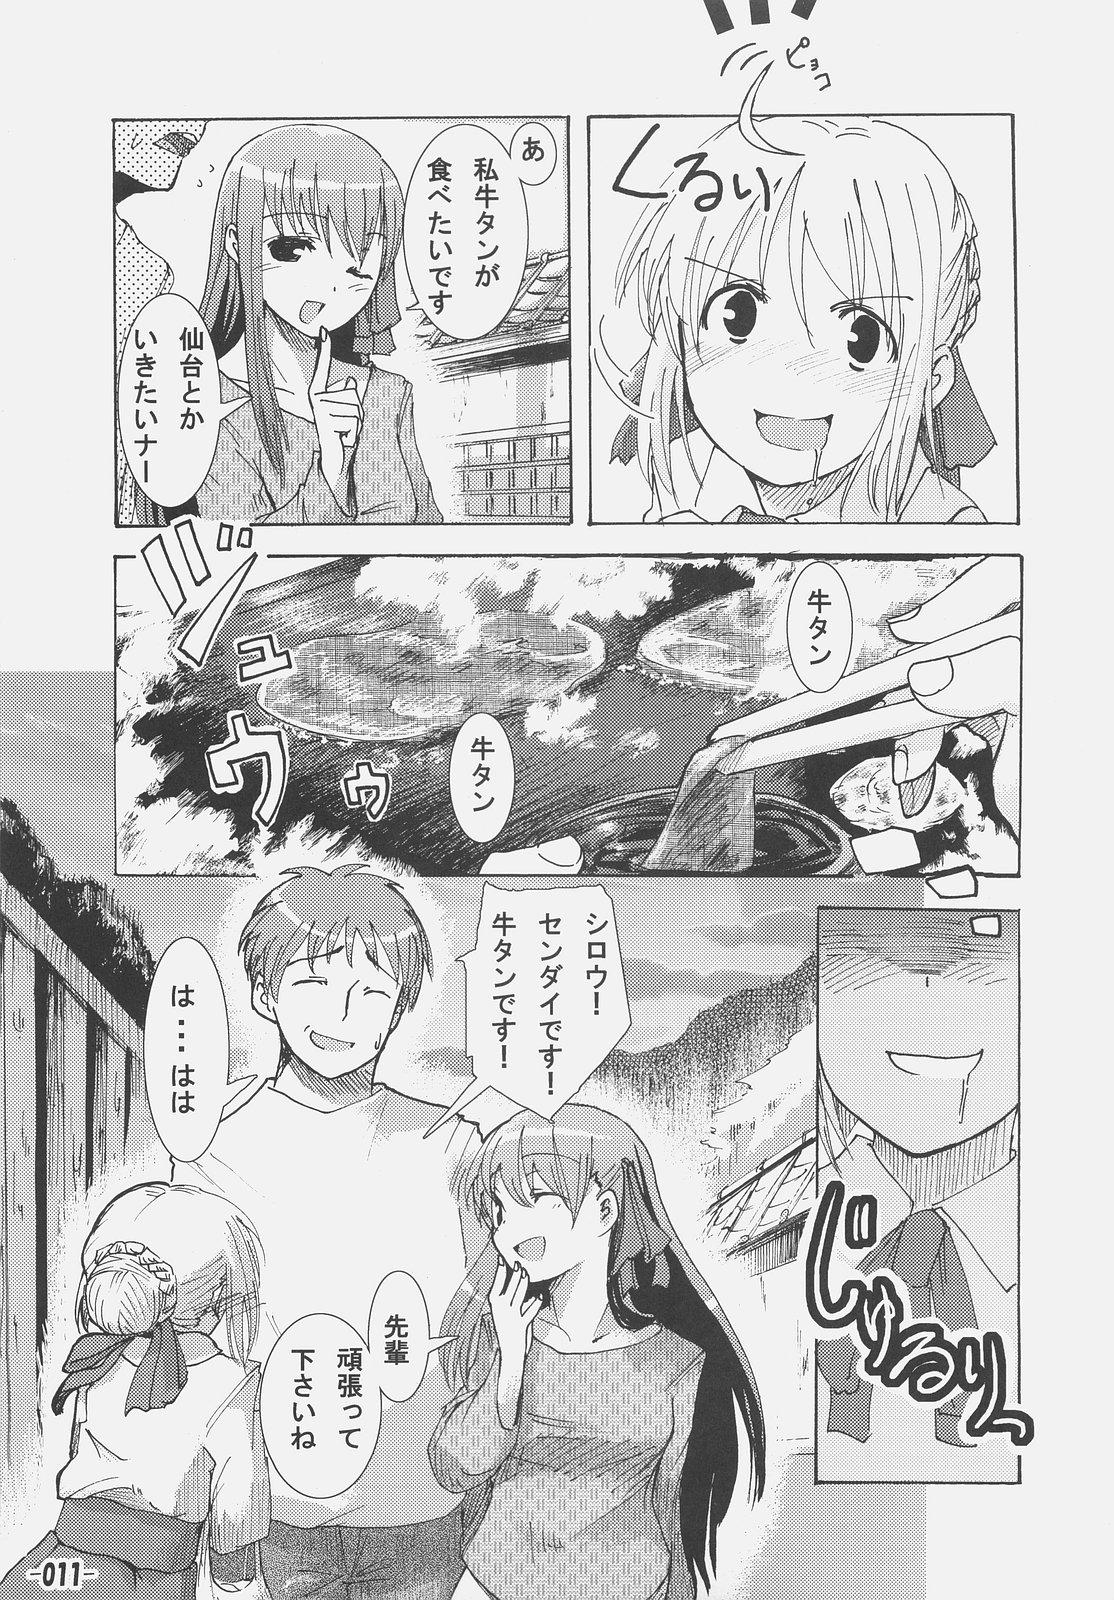 Dominicana Frenzy driving - Fate hollow ataraxia Speculum - Page 10